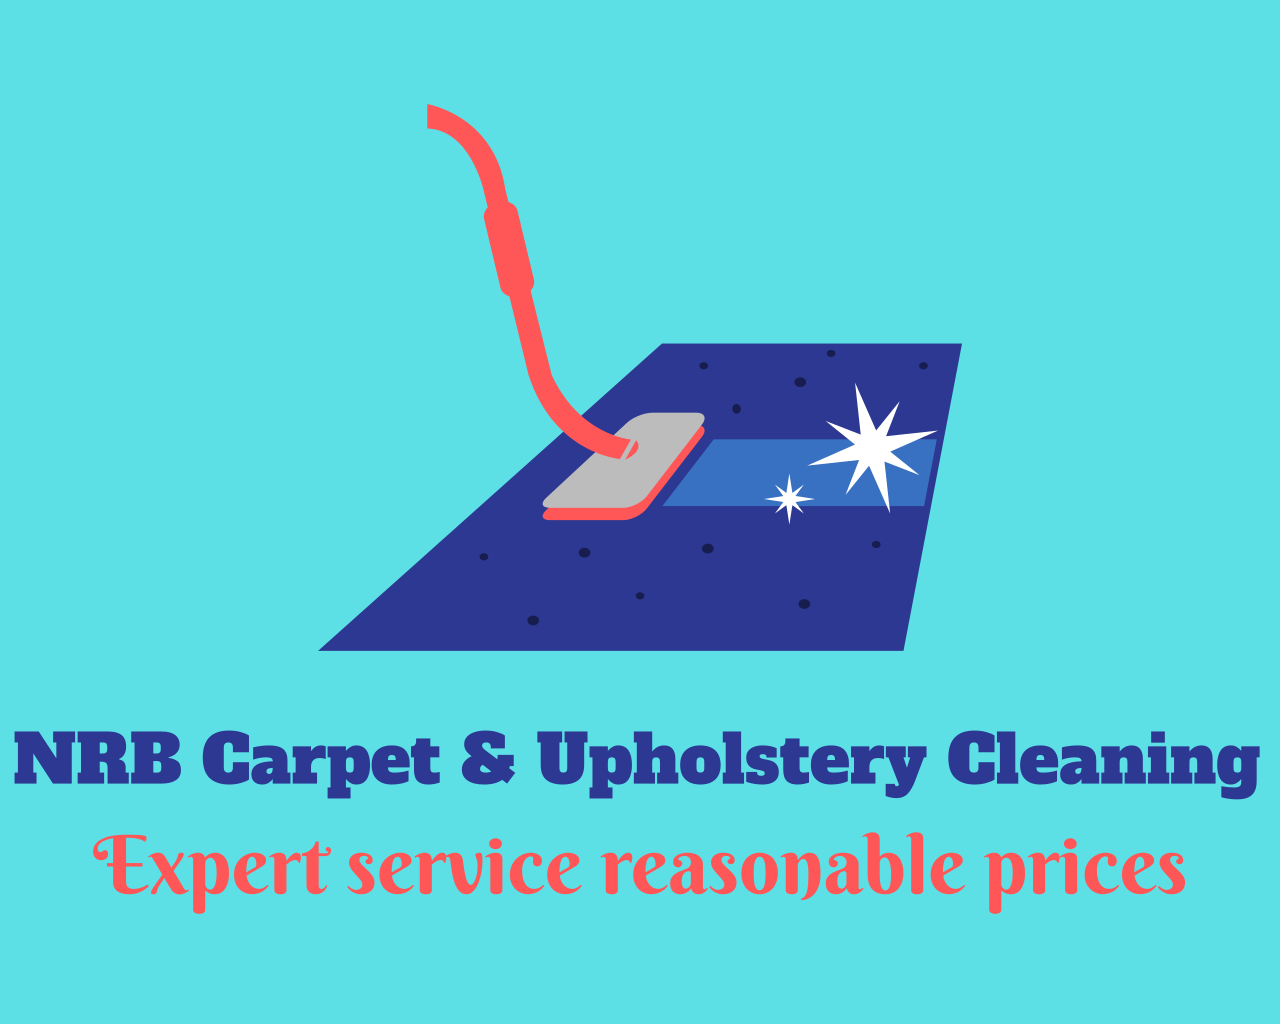 NRB Carpet & Upholstery Cleaning